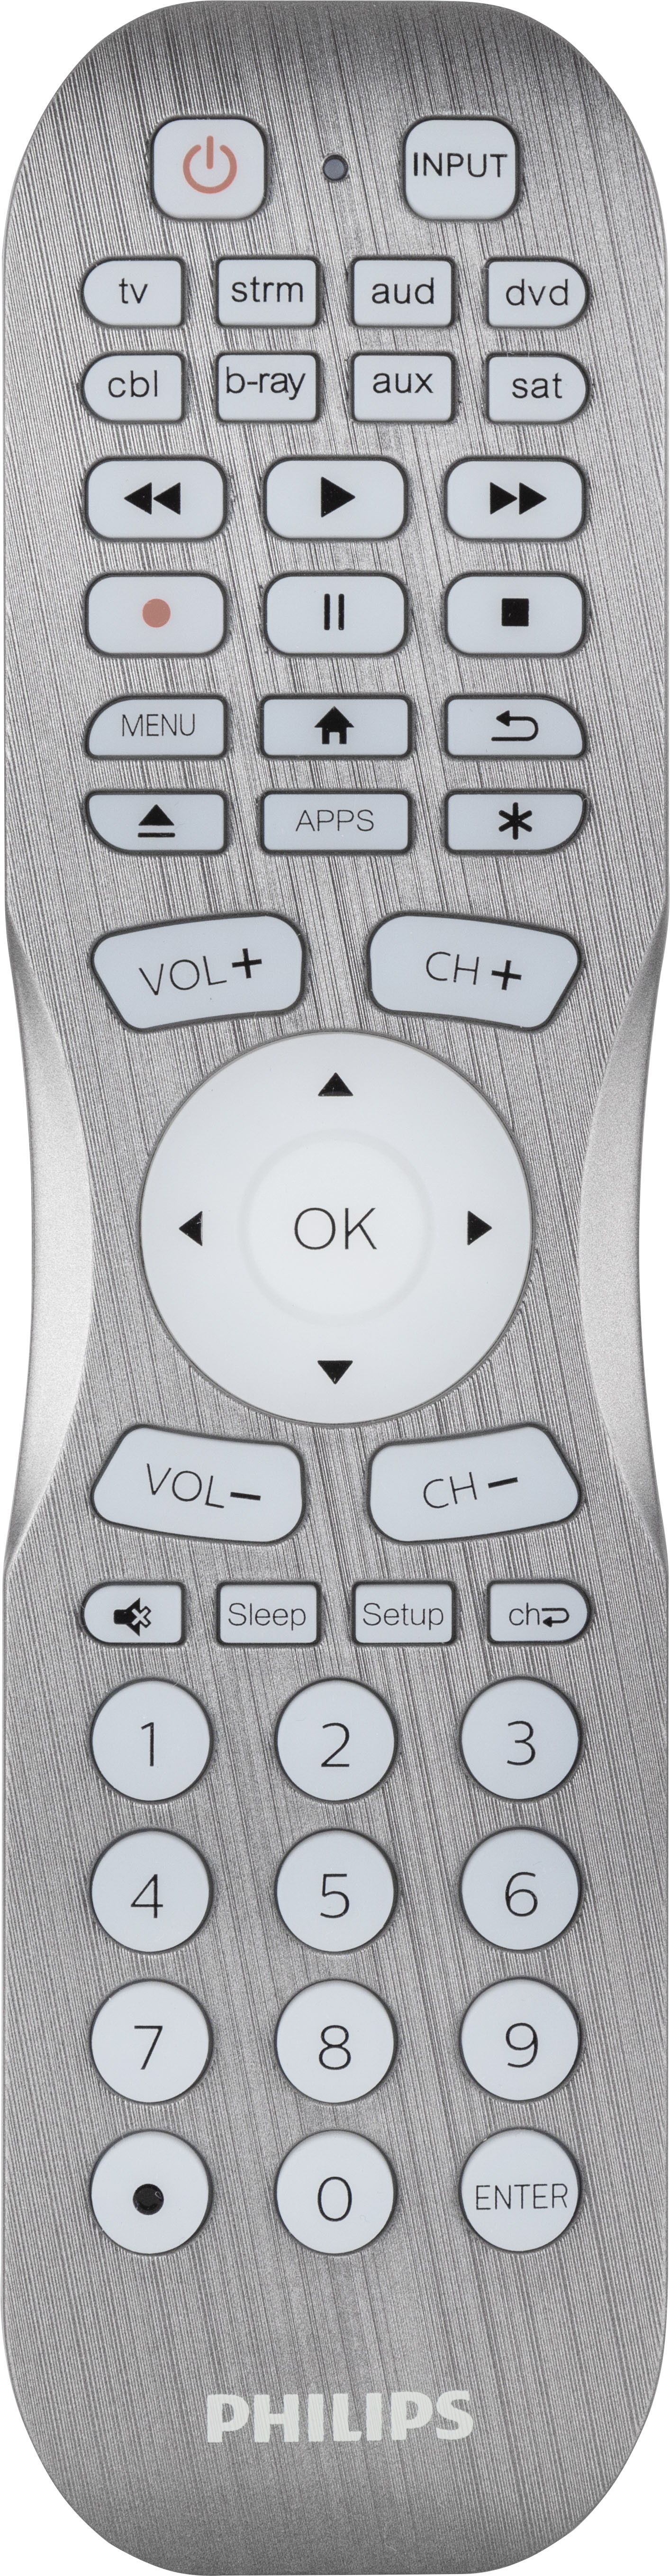 0030878609500 - PHILIPS - 8 DEVICE BACKLIT UNIVERSAL REMOTE CONTROL - BRUSHED GRAPHITE